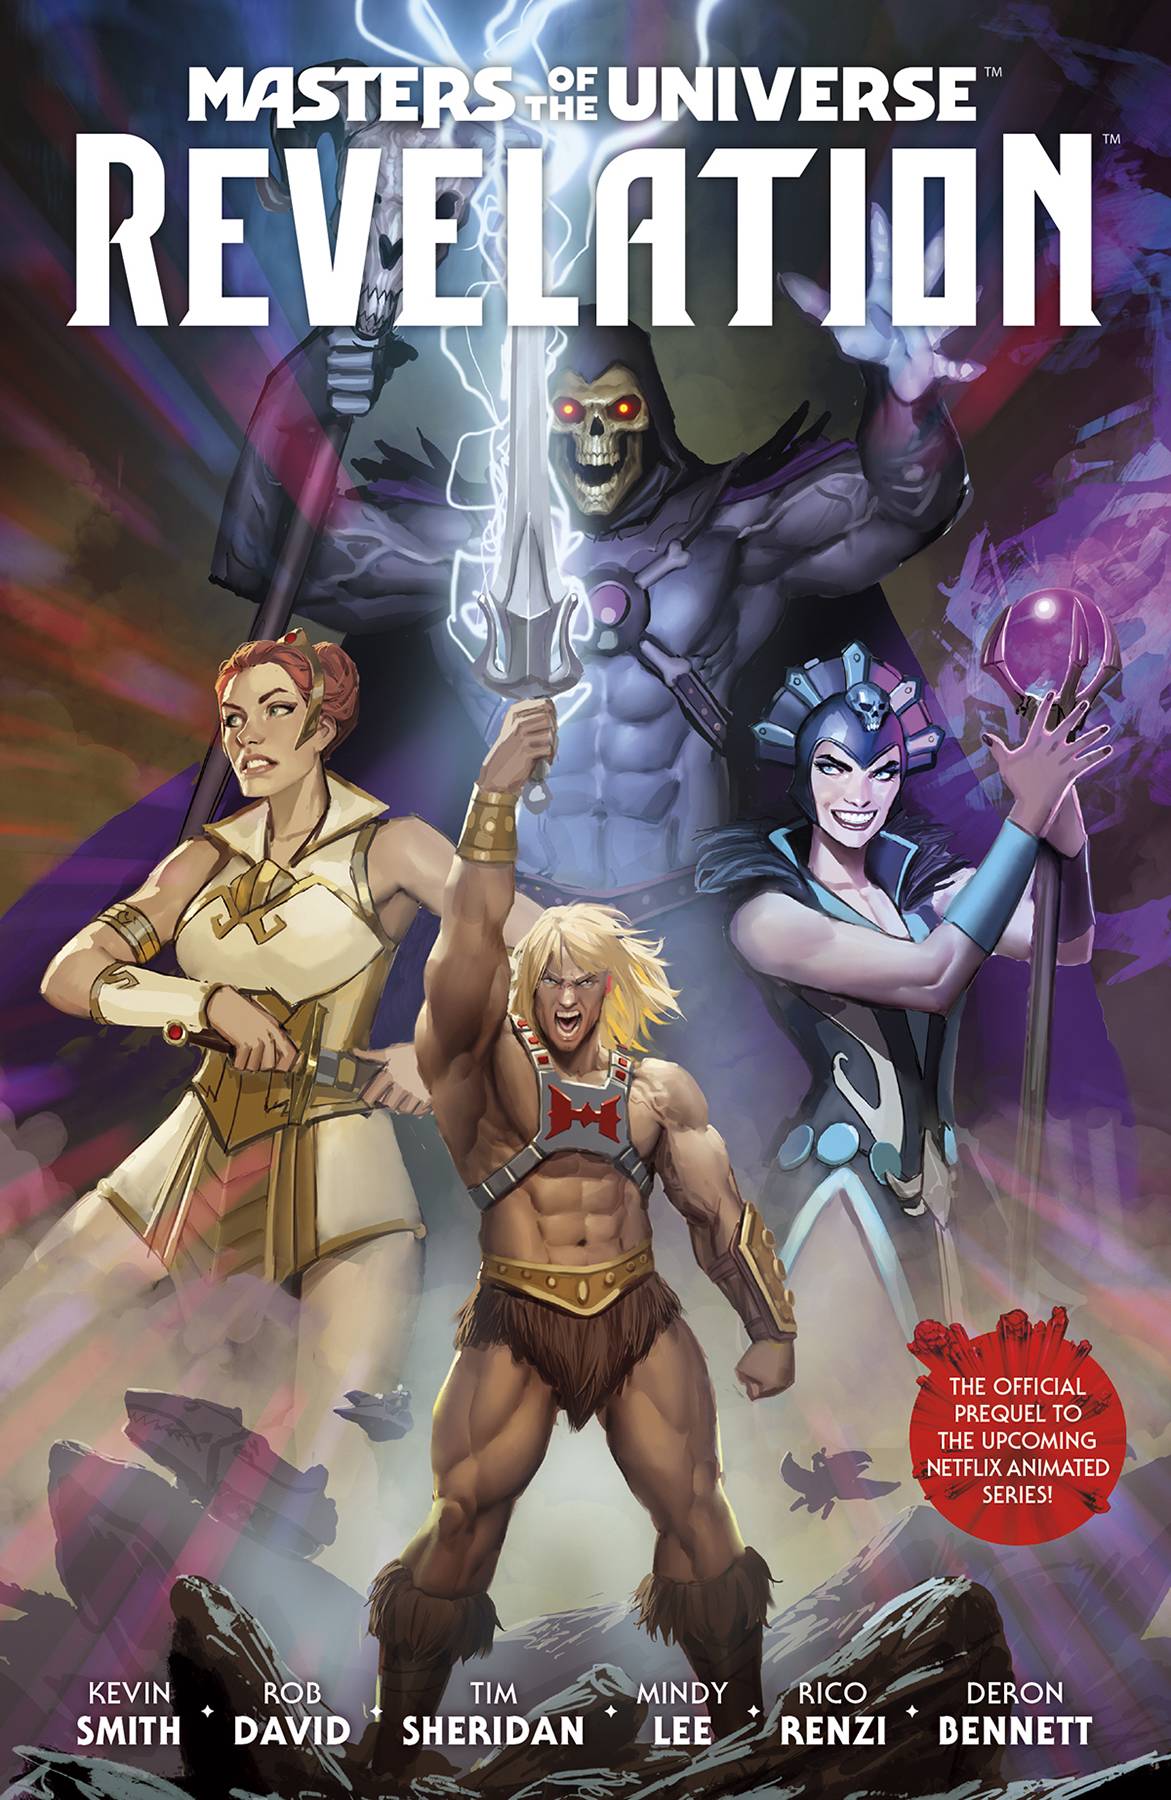 MASTERS OF THE UNIVERSE: REVELATION TP (OCT210225)